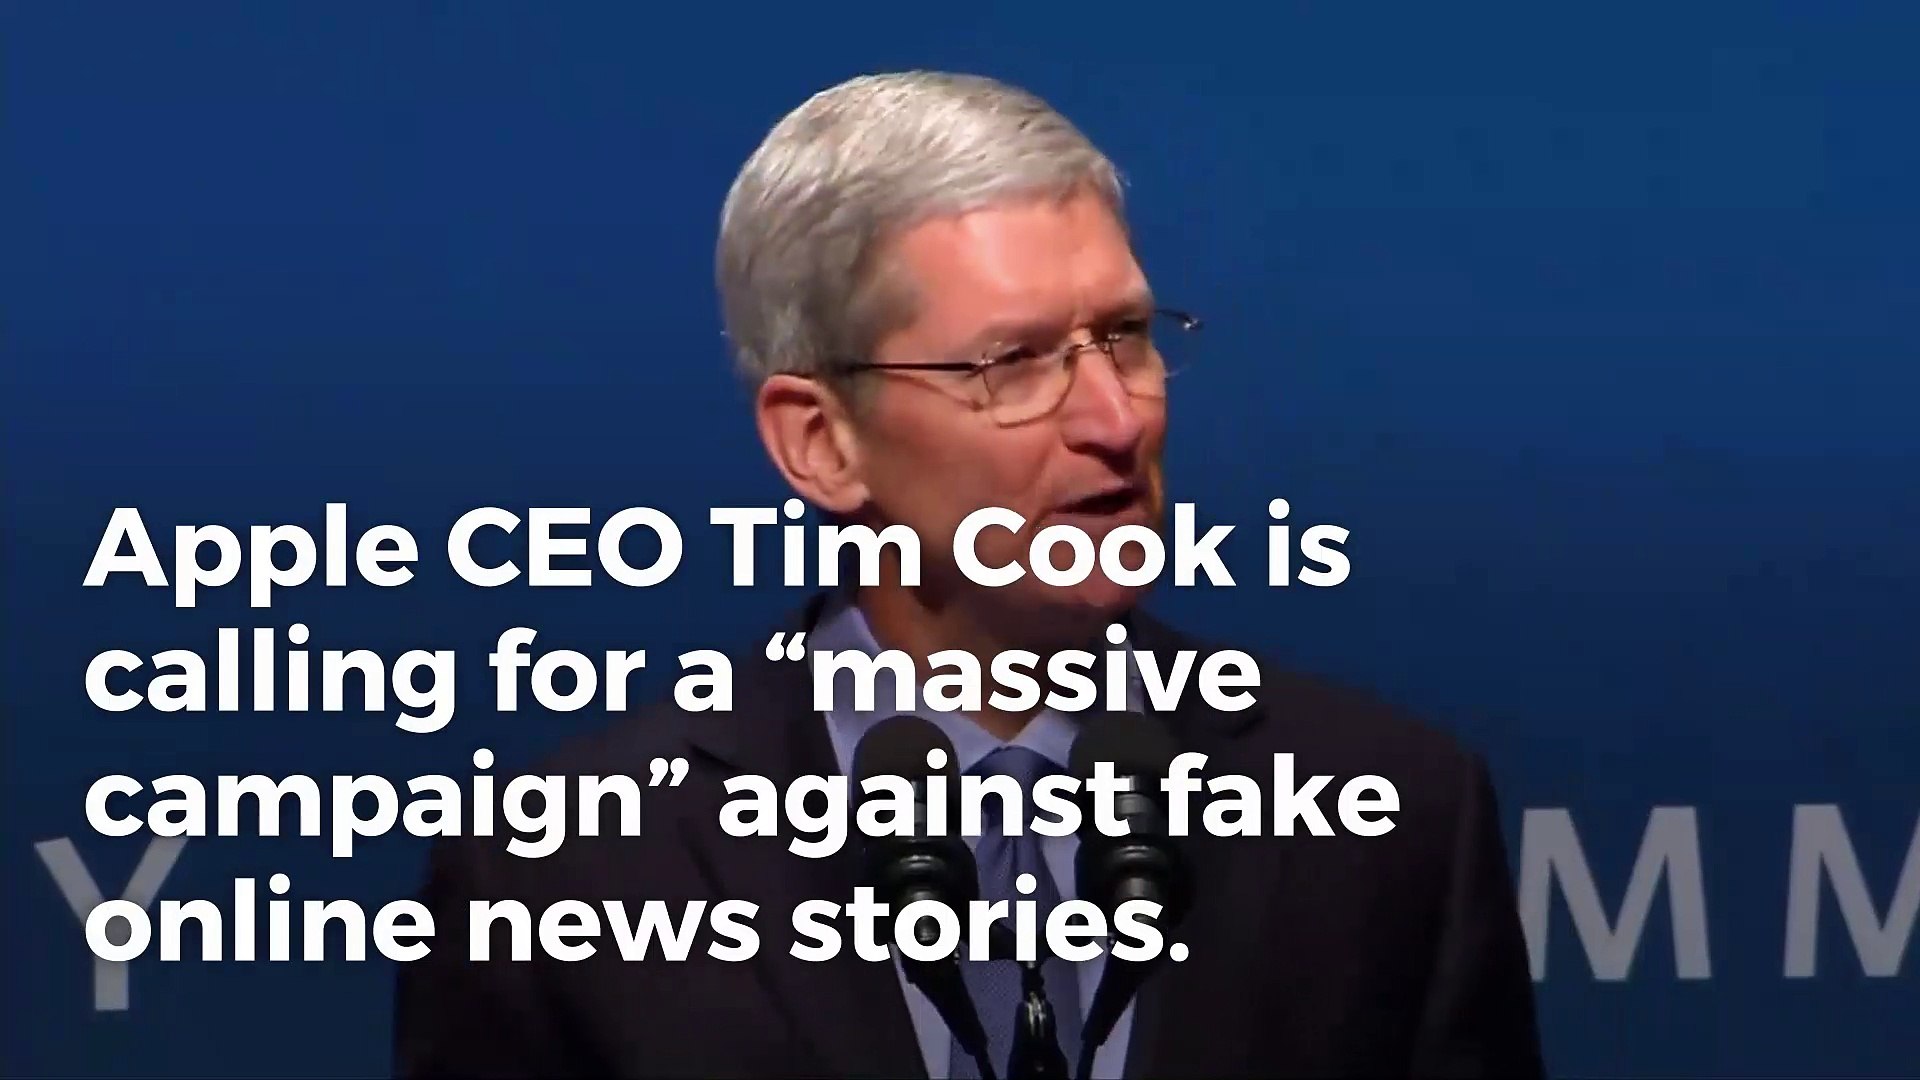 ⁣Apple CEO Tim Cook calls for 'massive campaign' to battle fake news